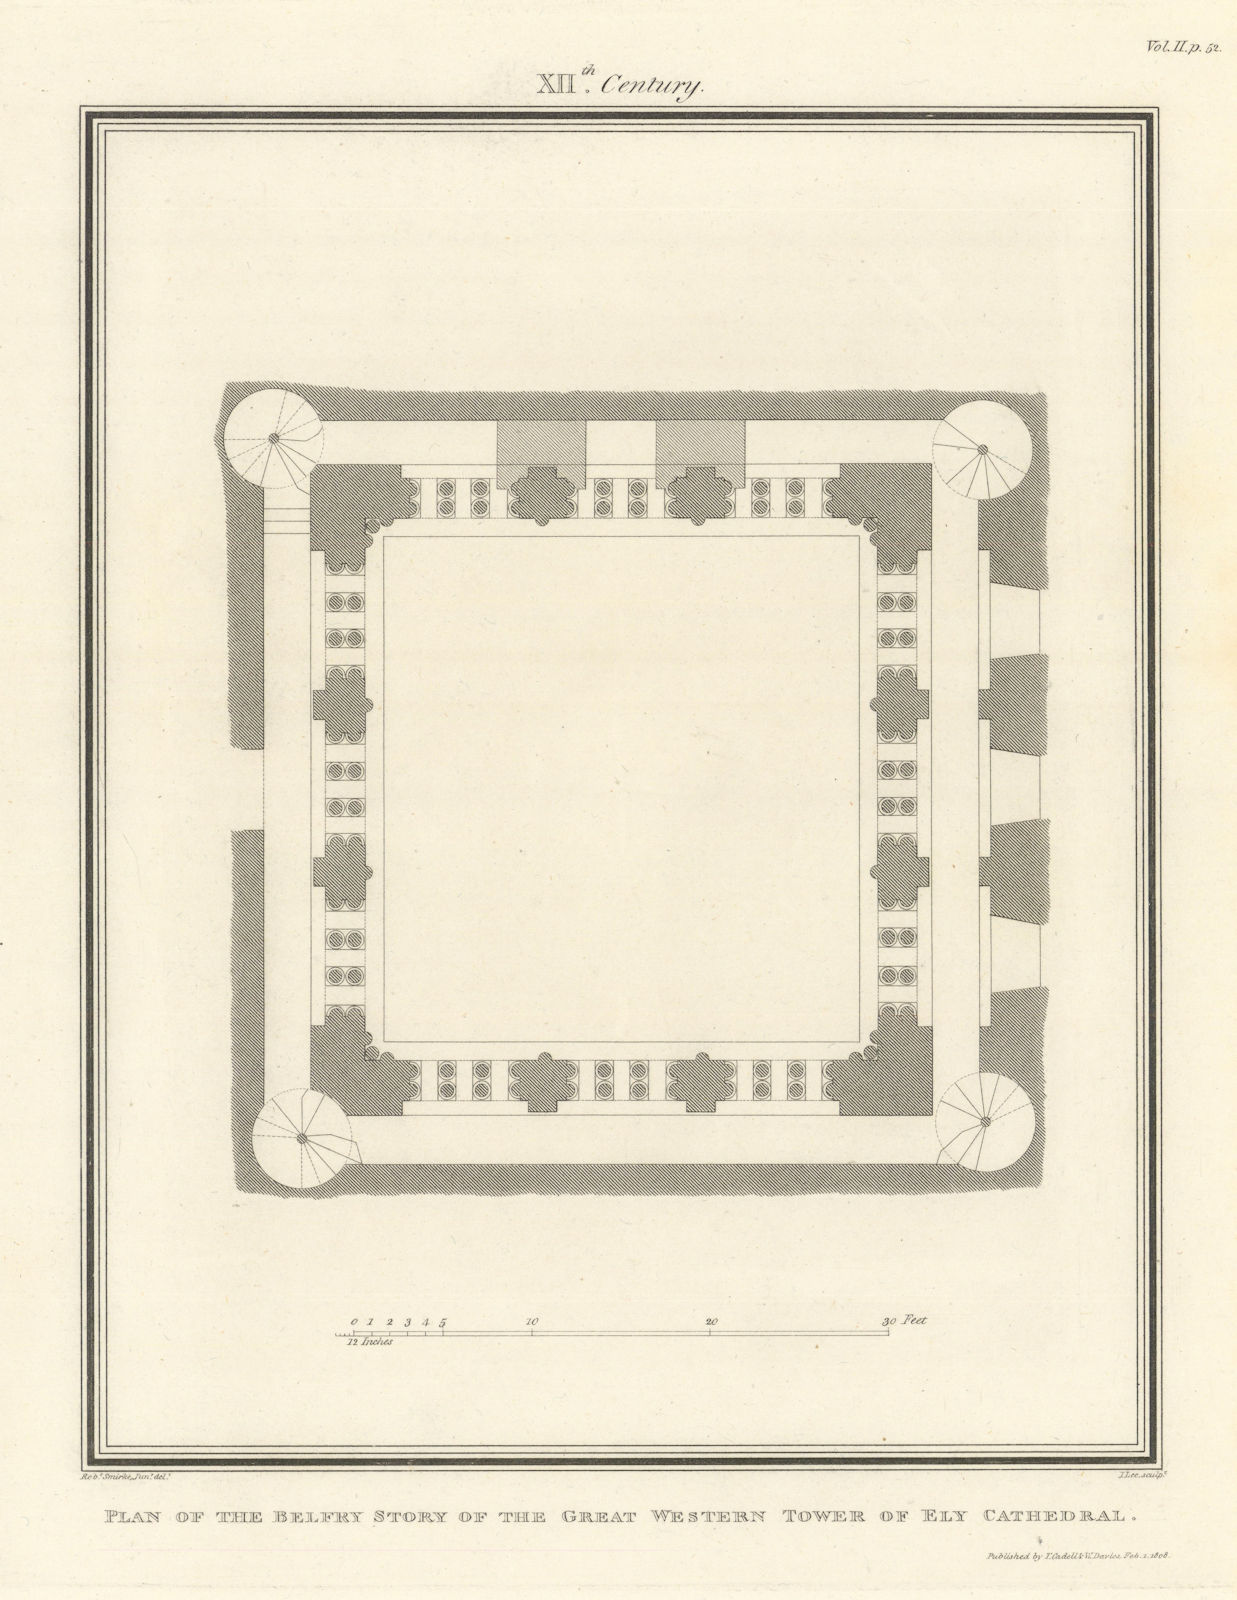 Plan of the belfry storey, Great Western Tower of Ely Cathedral. SMIRKE 1810 map